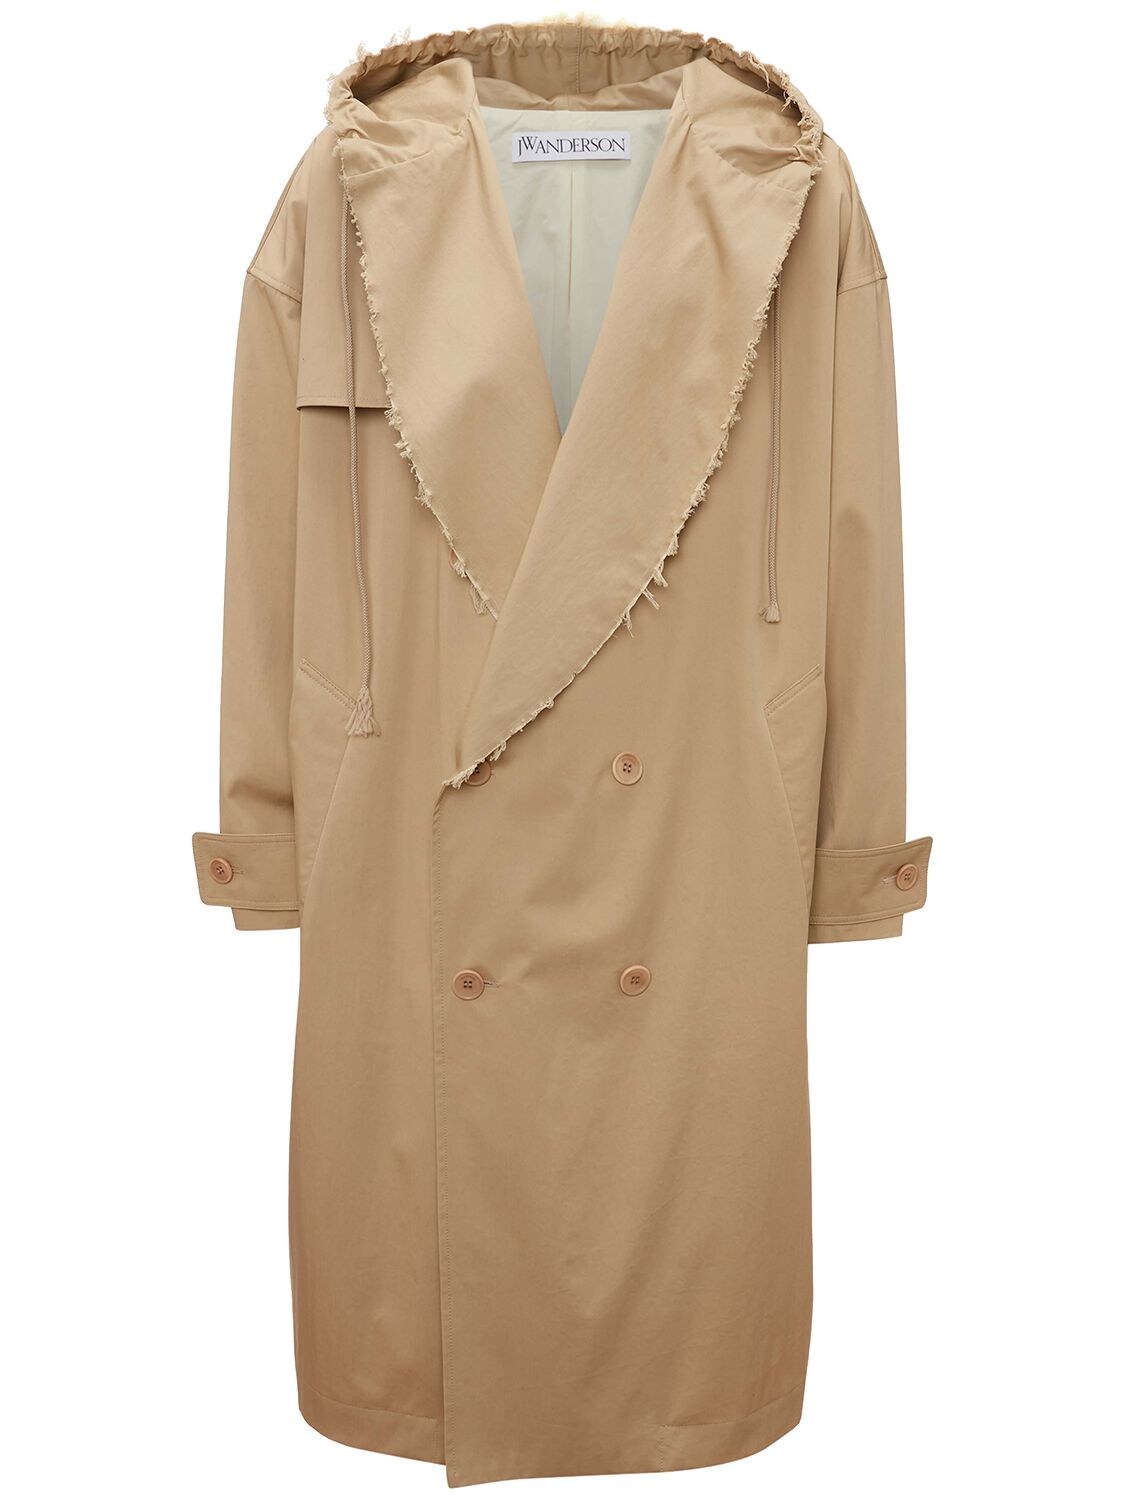 JW ANDERSON COTTON TWILL HOODED TRENCH COAT